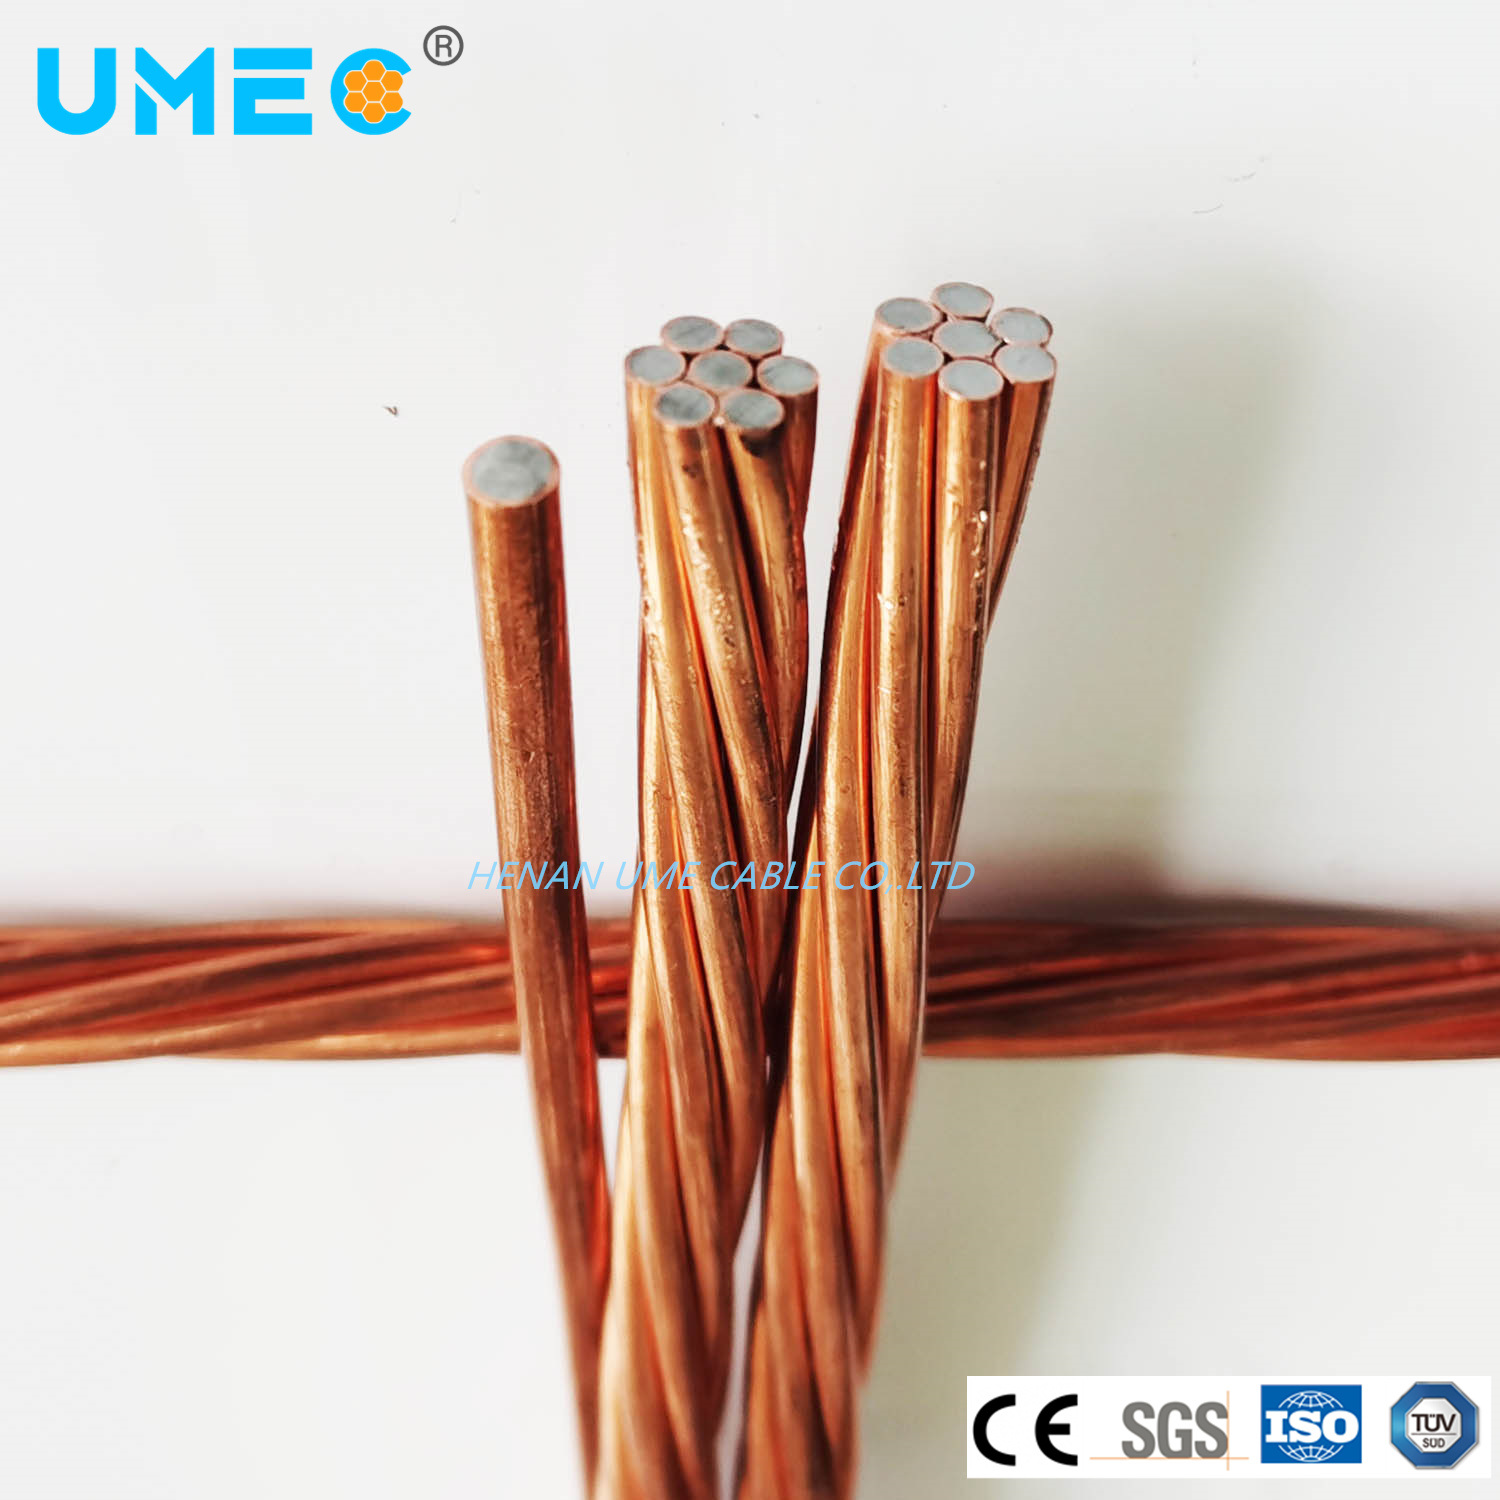 Electric Copper Clad Steel (CCS) Composite Conductor 40%Iacs Electrical Conductivity 2.05mm 3.26mm Electrical CCS